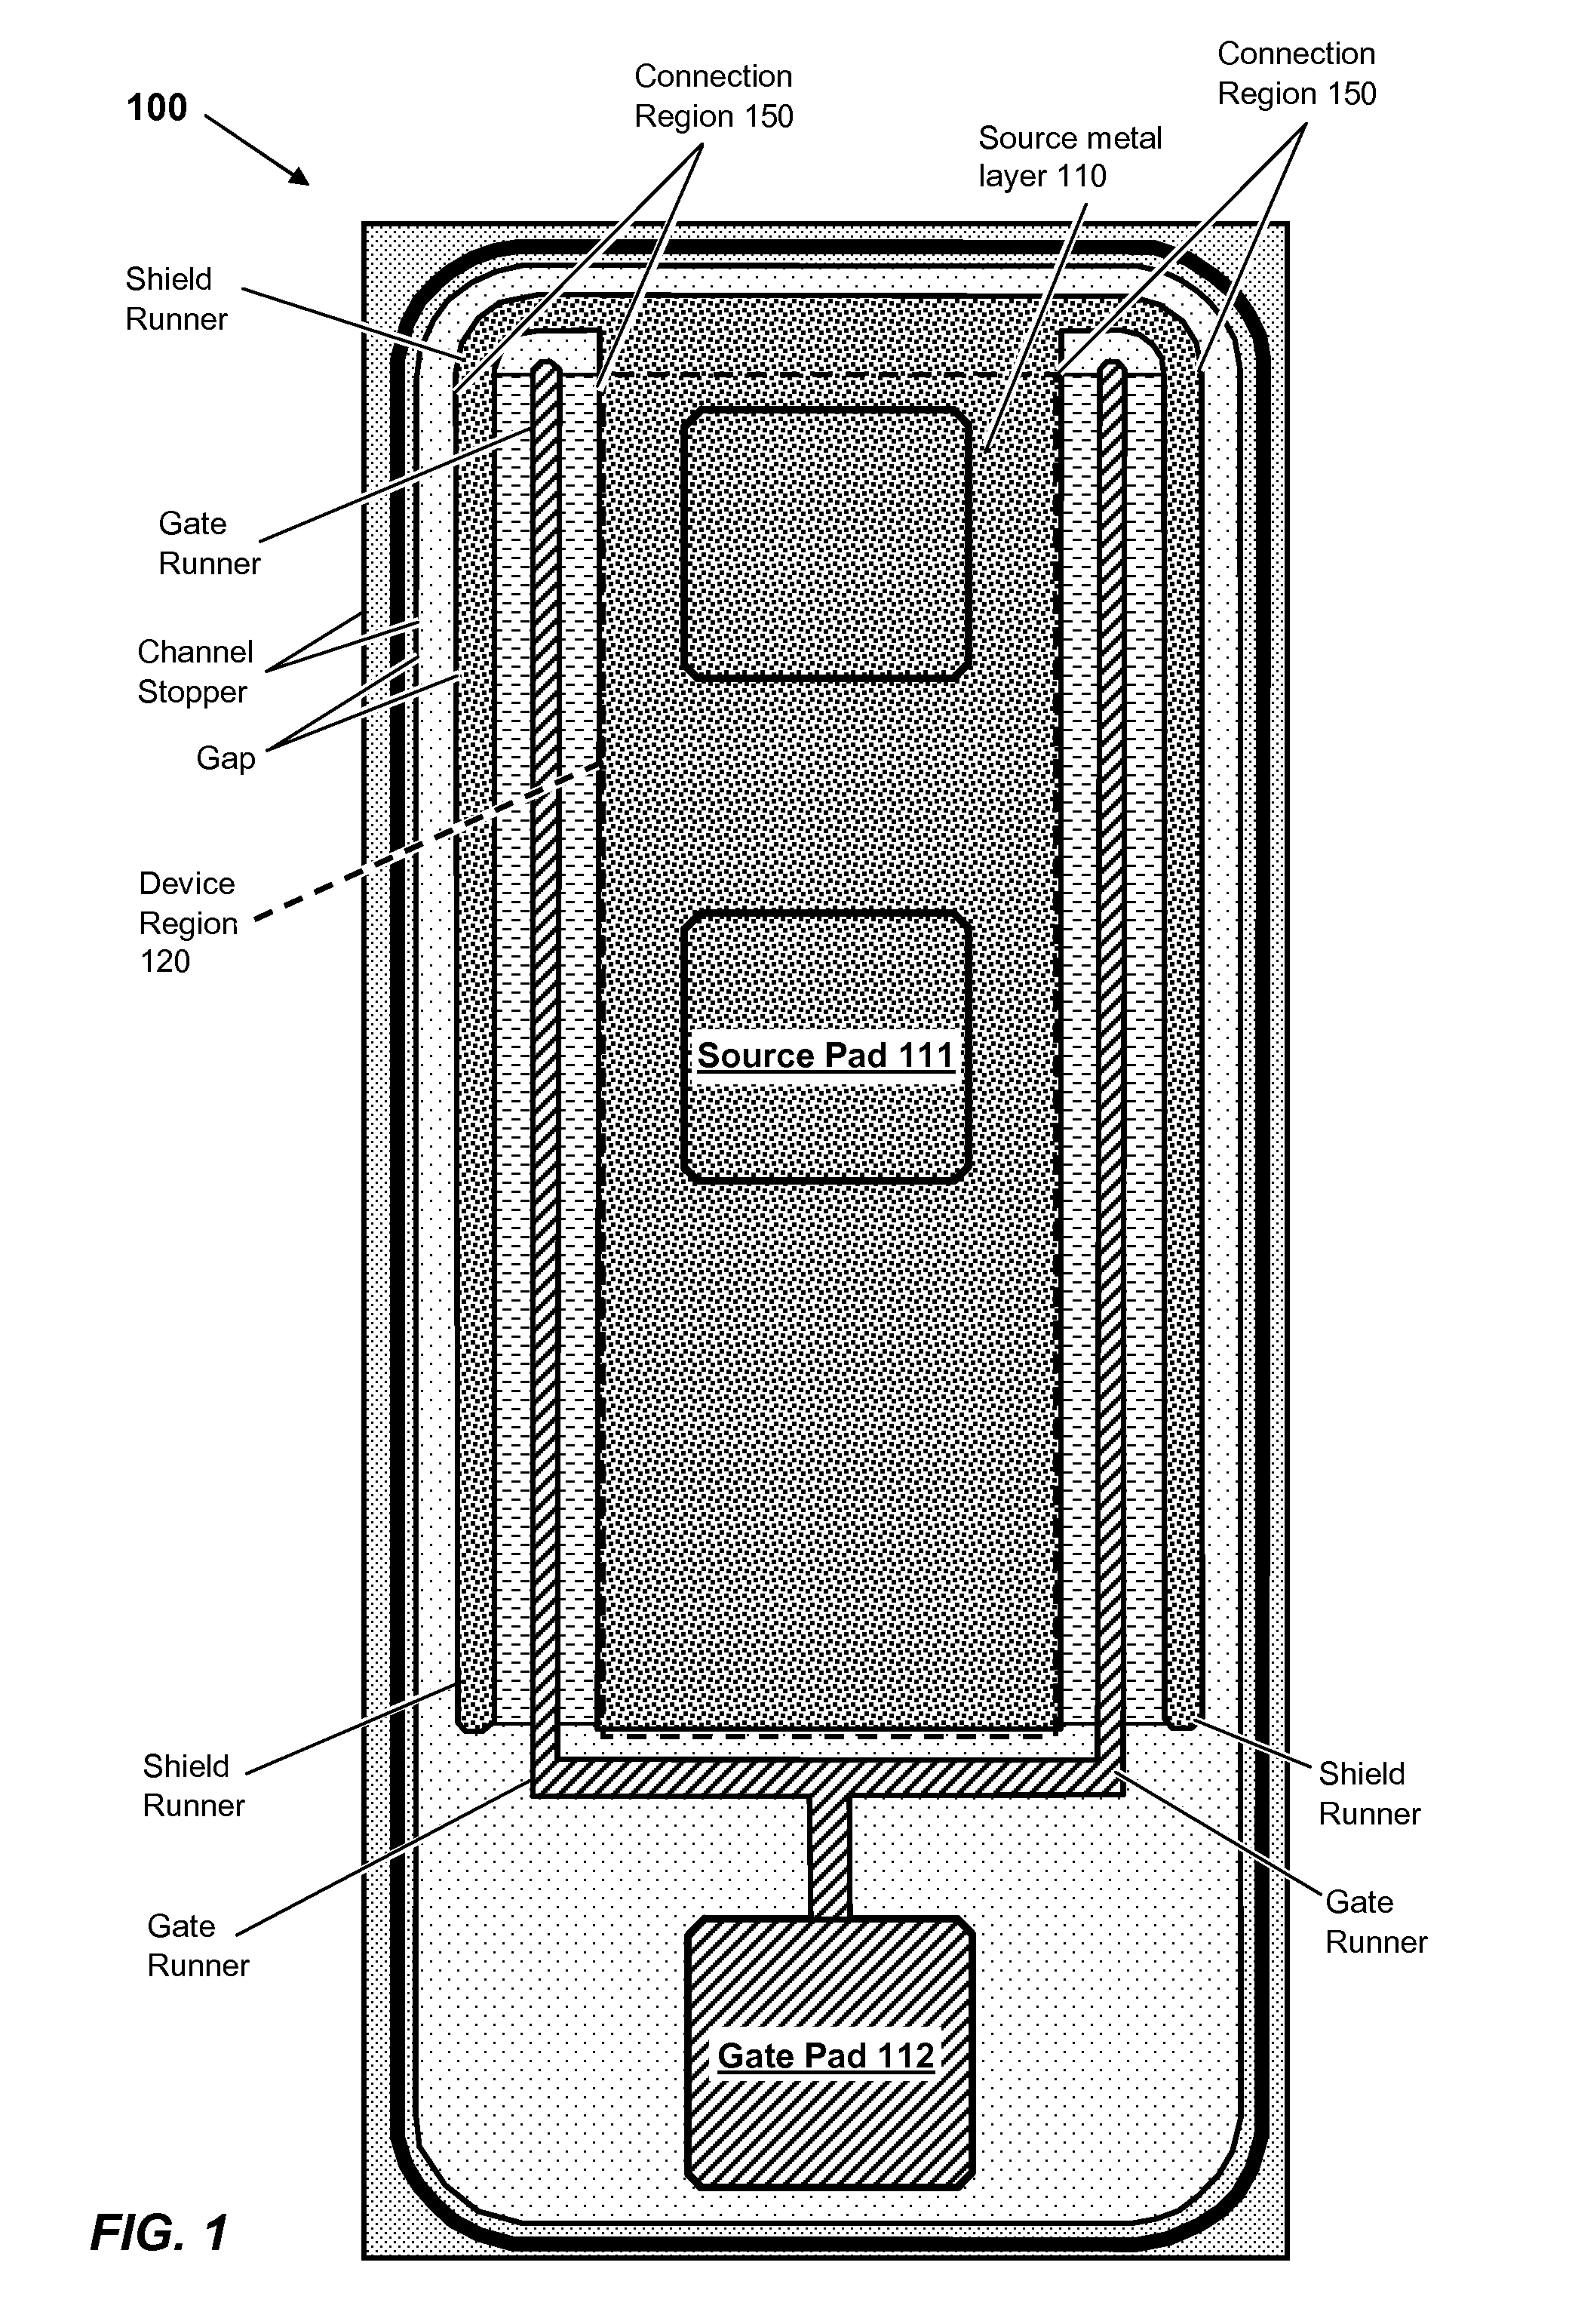 Trench-Based Power Semiconductor Devices with Increased Breakdown Voltage Characteristics